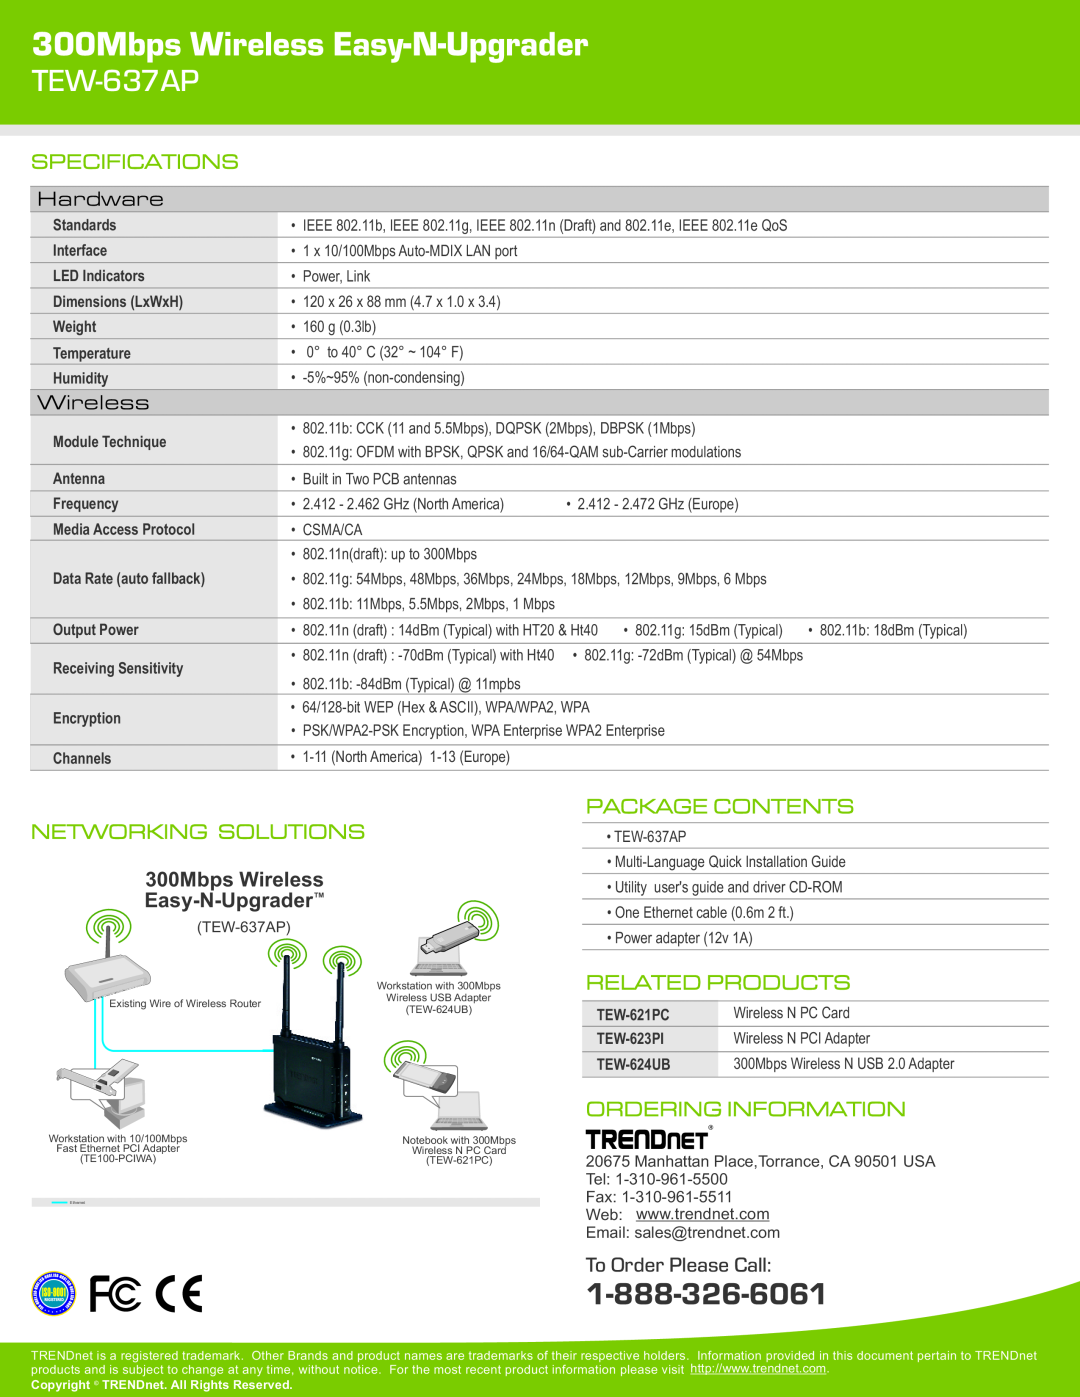 TRENDnet TEW-637AP 300Mbps Wireless Easy-N-Upgrader, Specifications, Hardware, Networking Solutions, Package Contents 